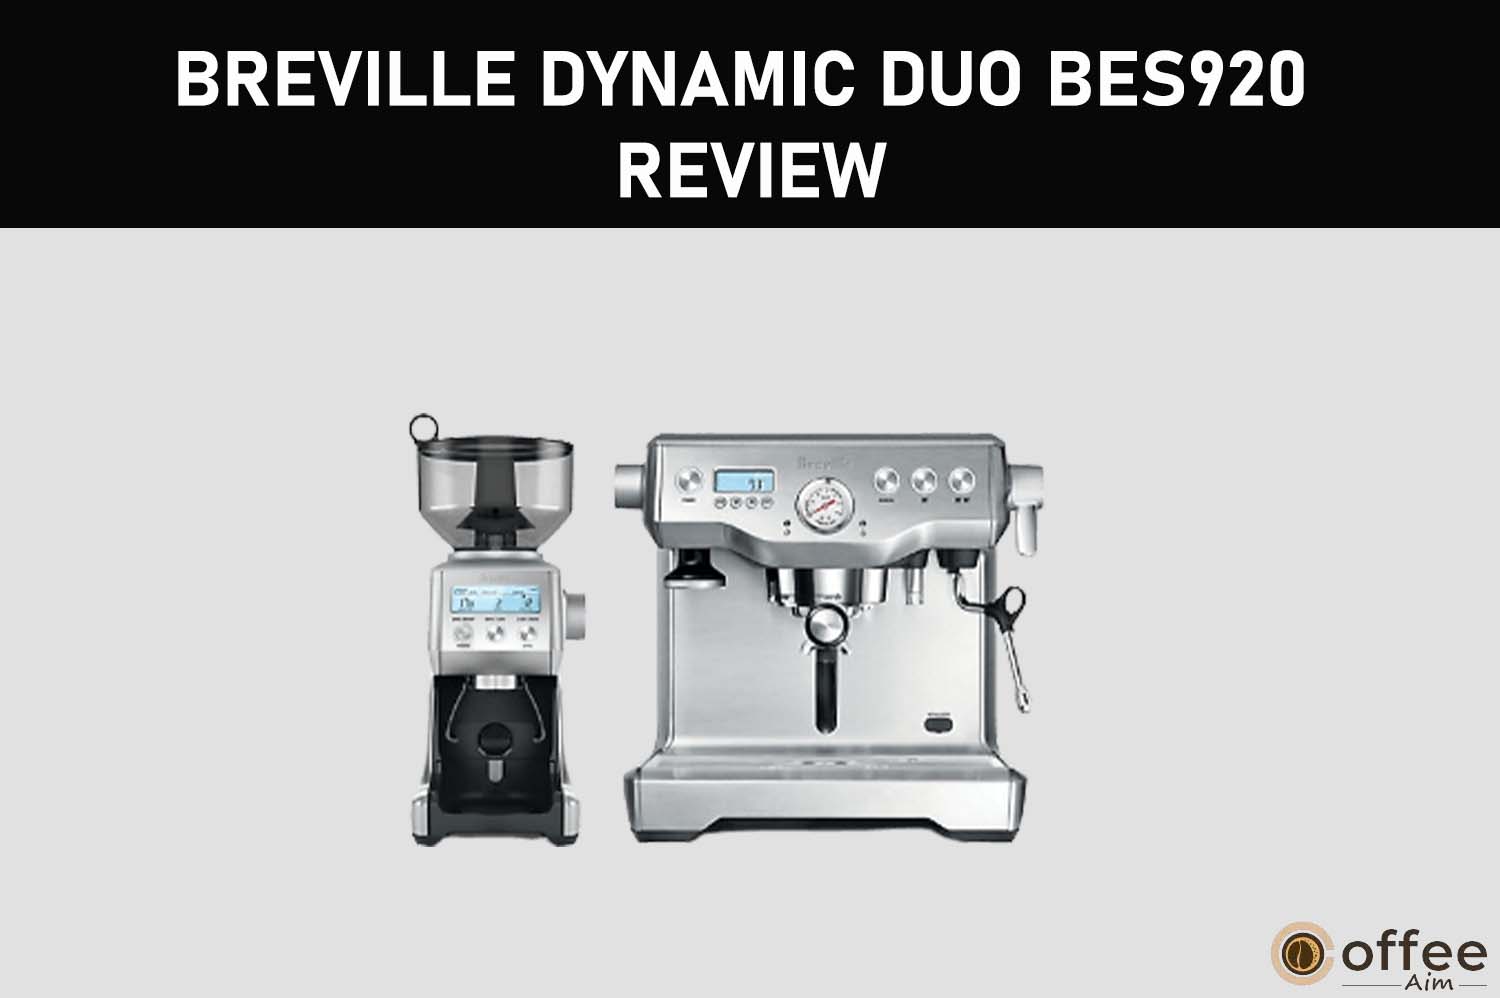 Featured image for the article "Breville Dynamic Duo BES920 Review"